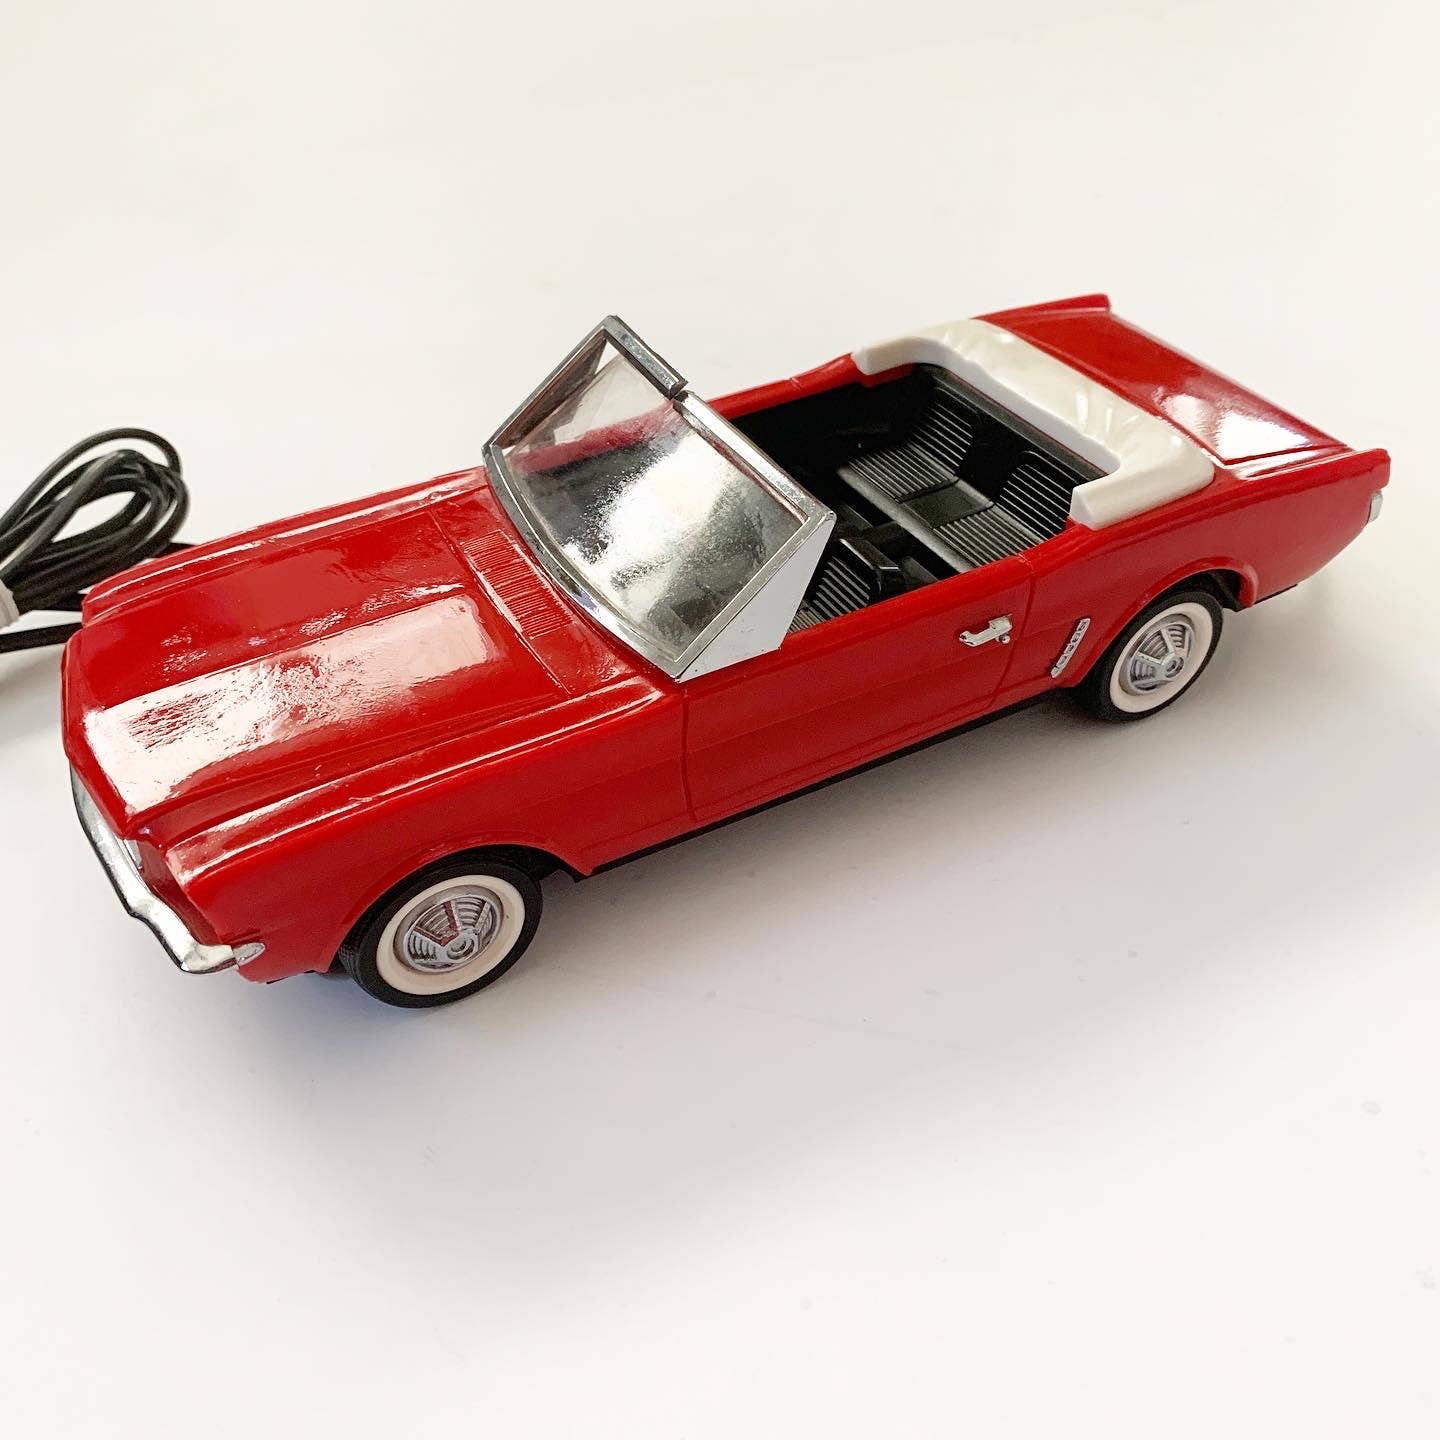 Vintage 1964 Kash N Gold Convertible Ford Mustang Novelty Red telephone